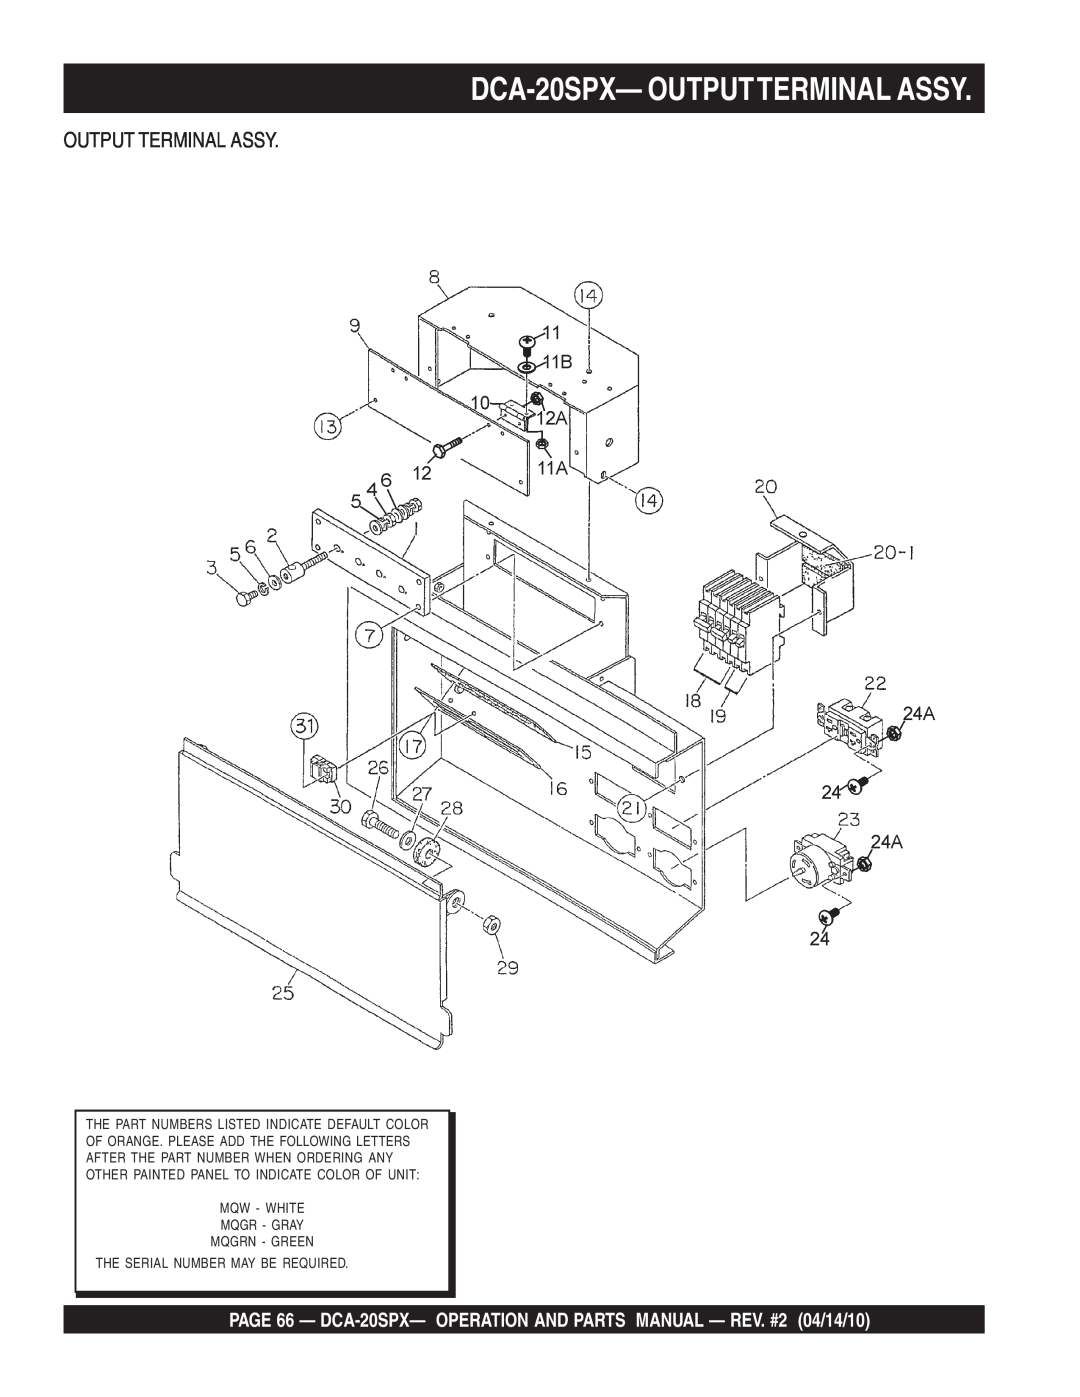 Multiquip DCA-20SPX- OUTPUTTERMINAL ASSY, PAGE 66 - DCA-20SPX- OPERATION AND PARTS MANUAL - REV. #2 04/14/10 